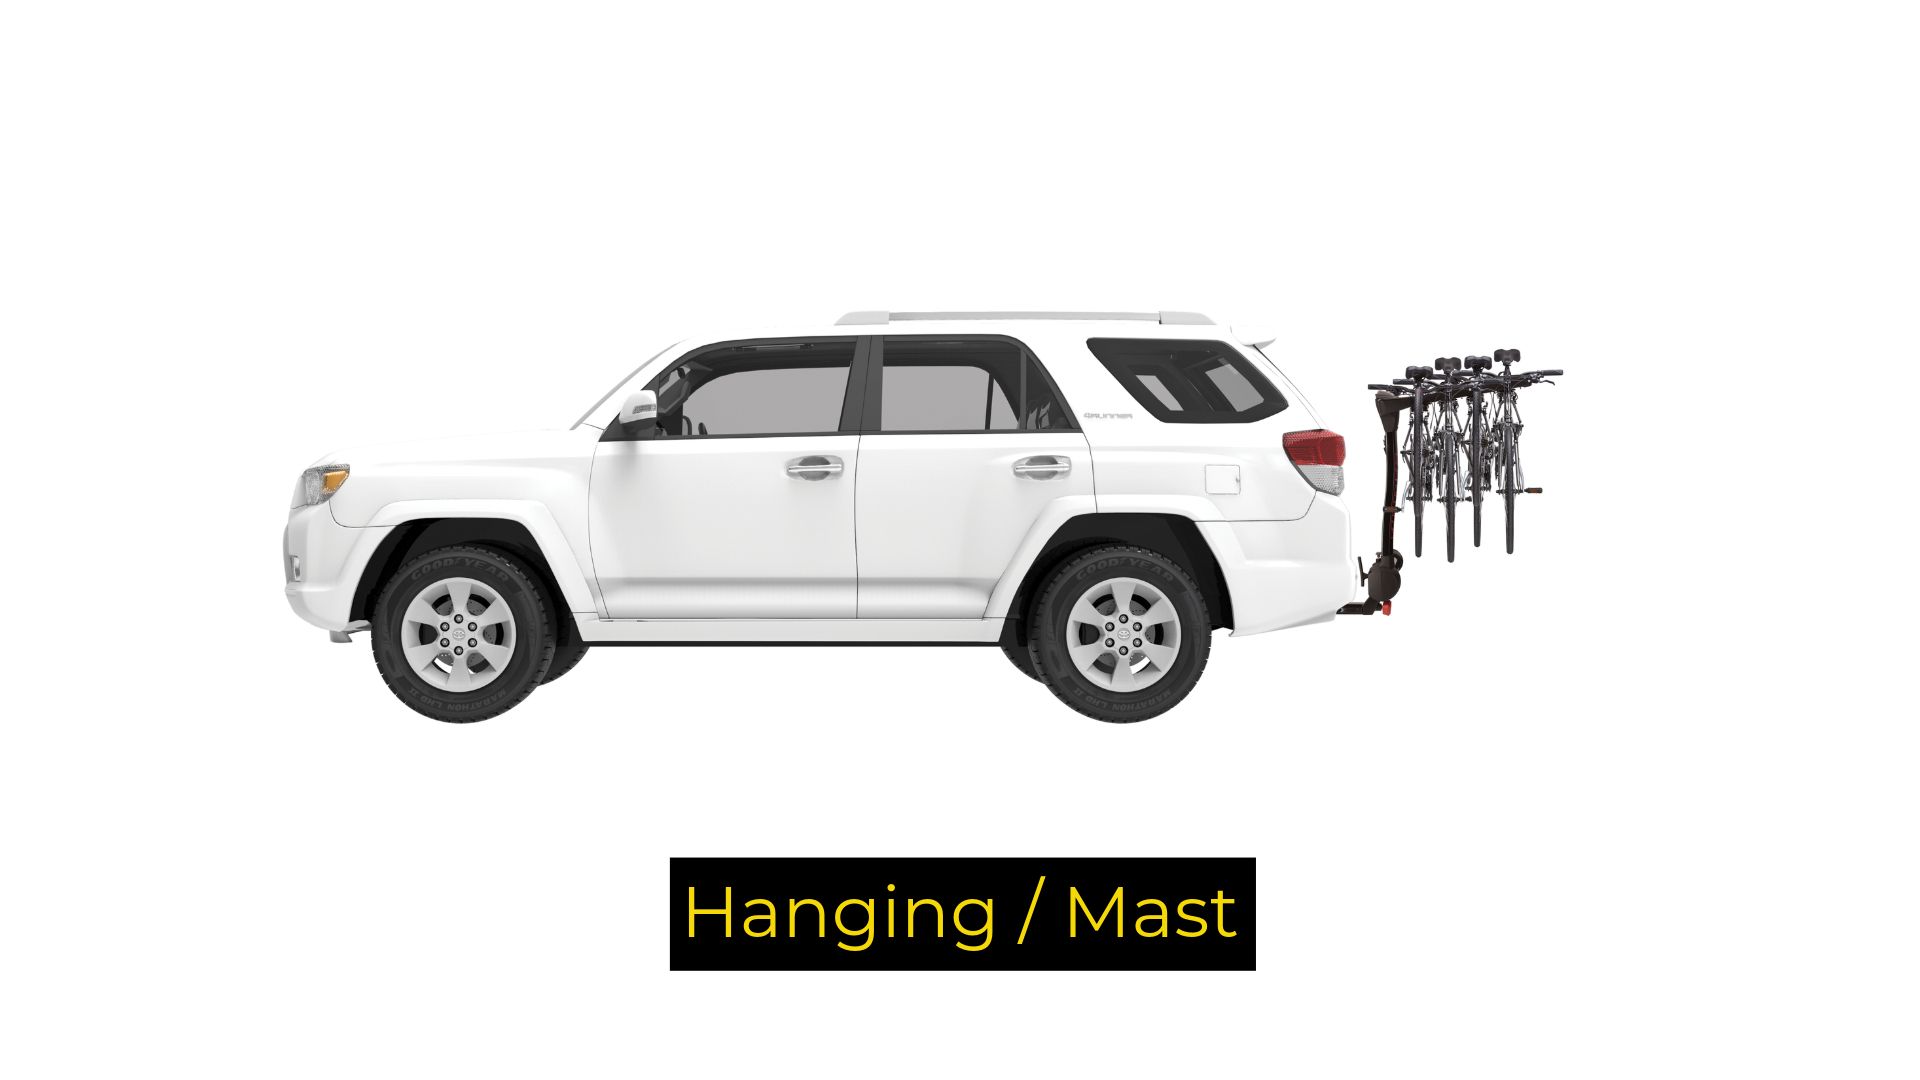 Car with a hanging style hitch bike rack